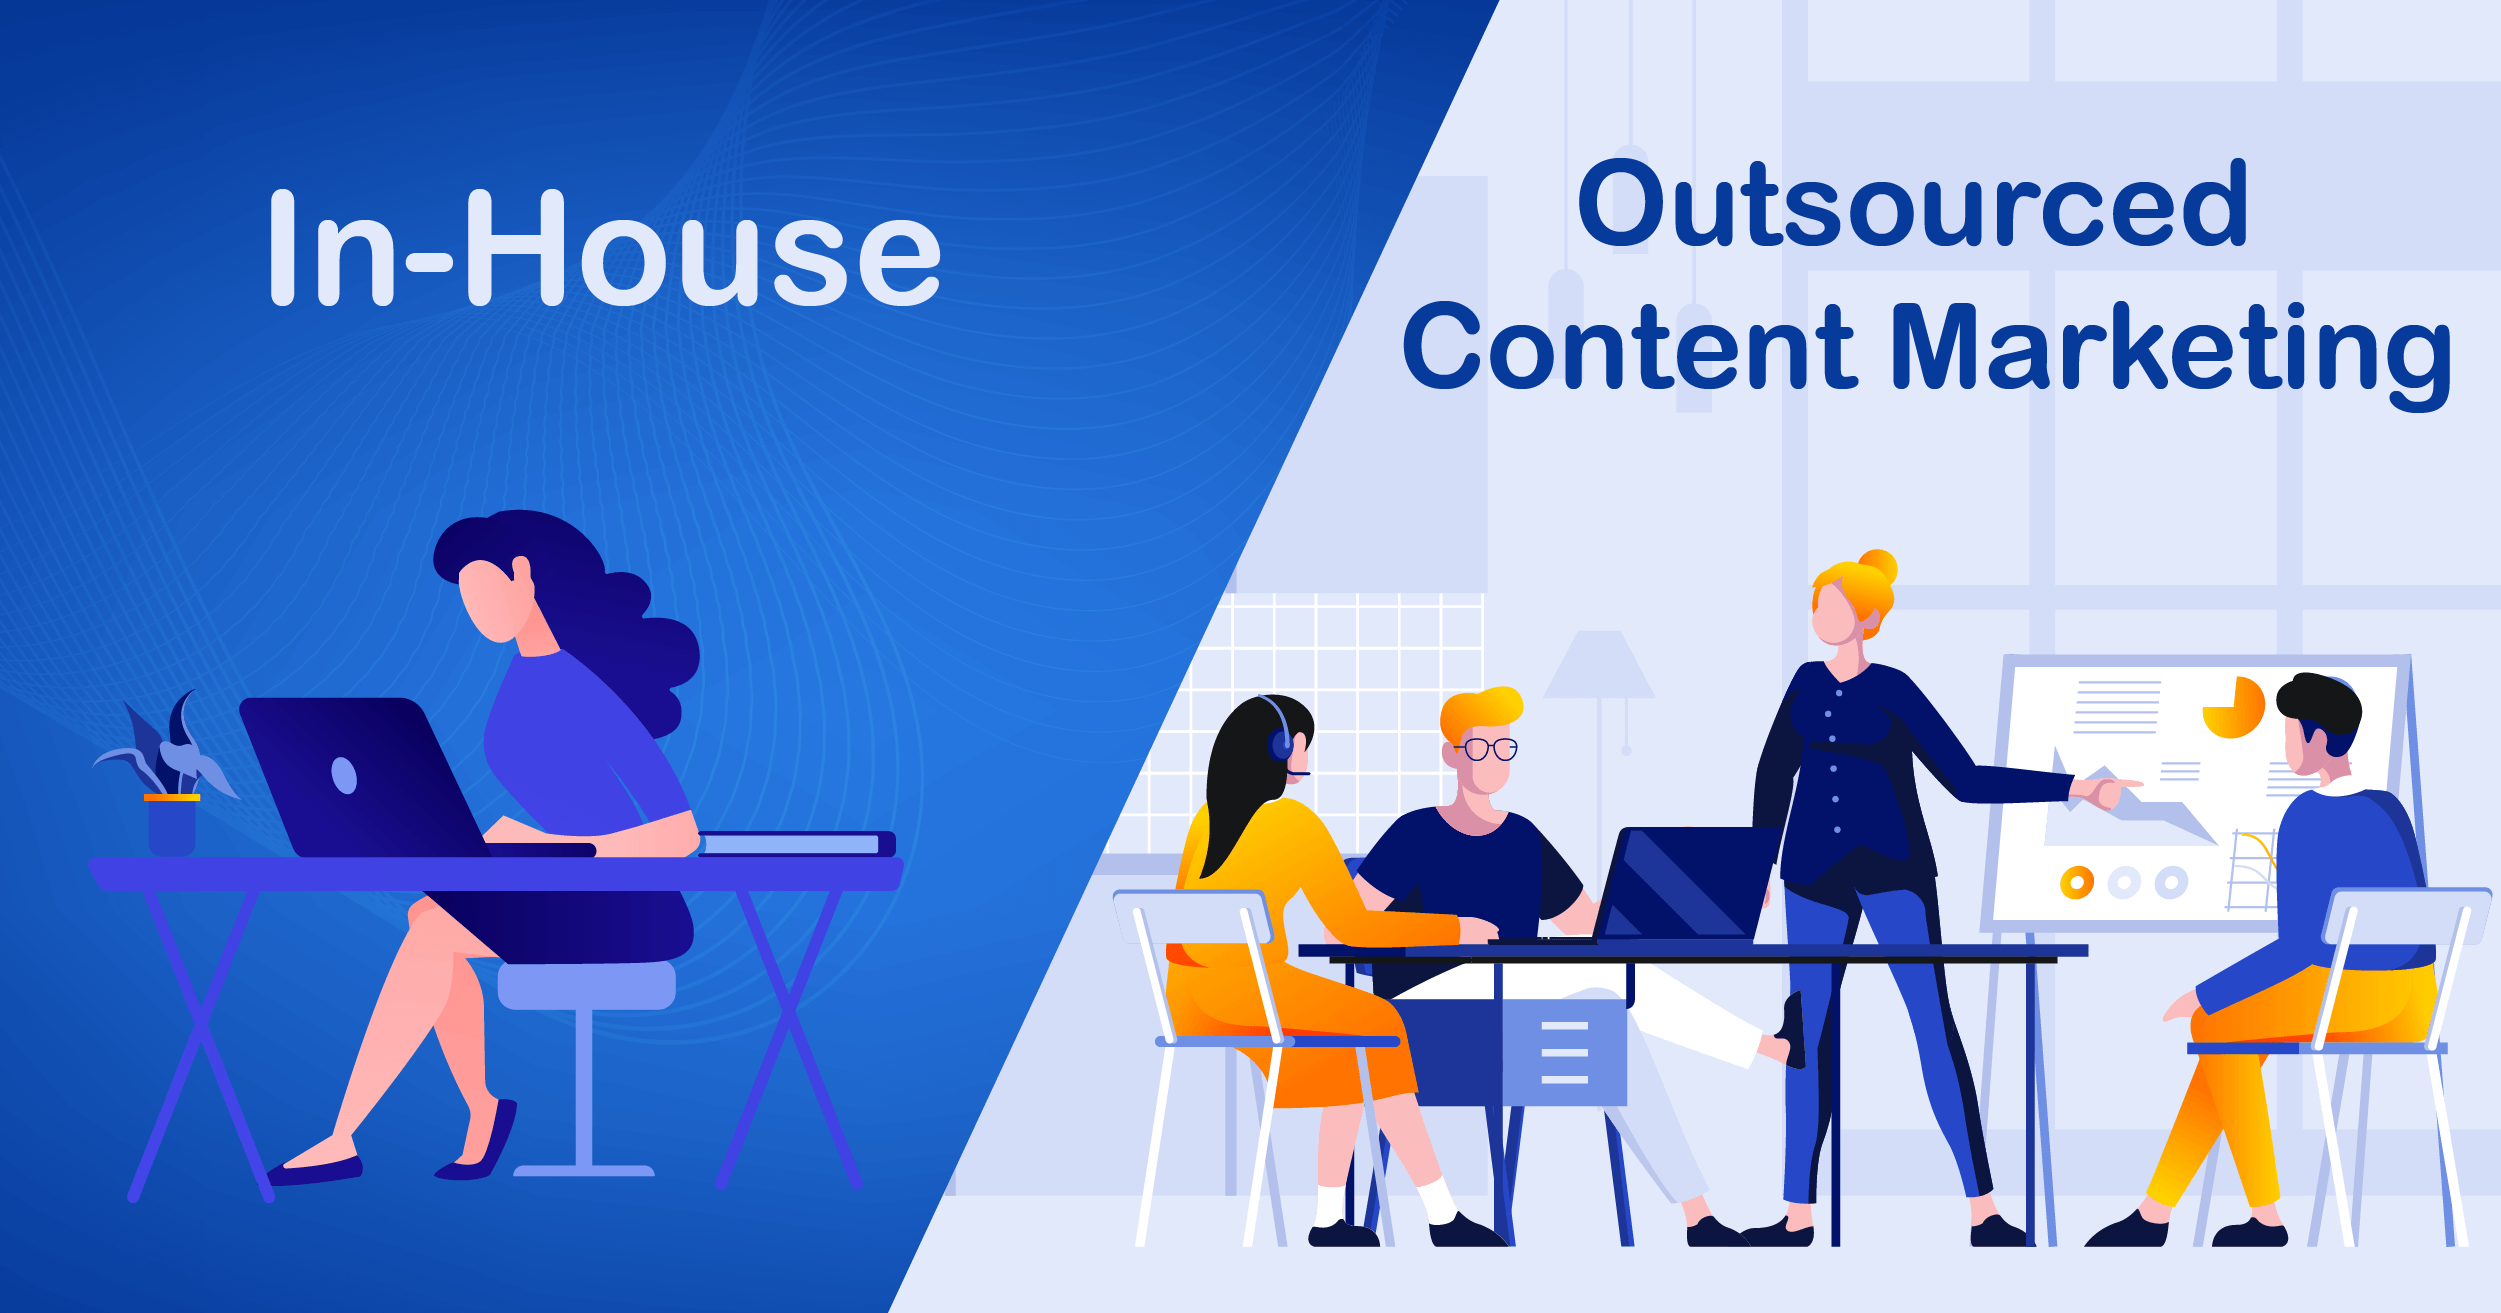 In-House vs. Outsourced Content Marketing for B2B SaaS Companies